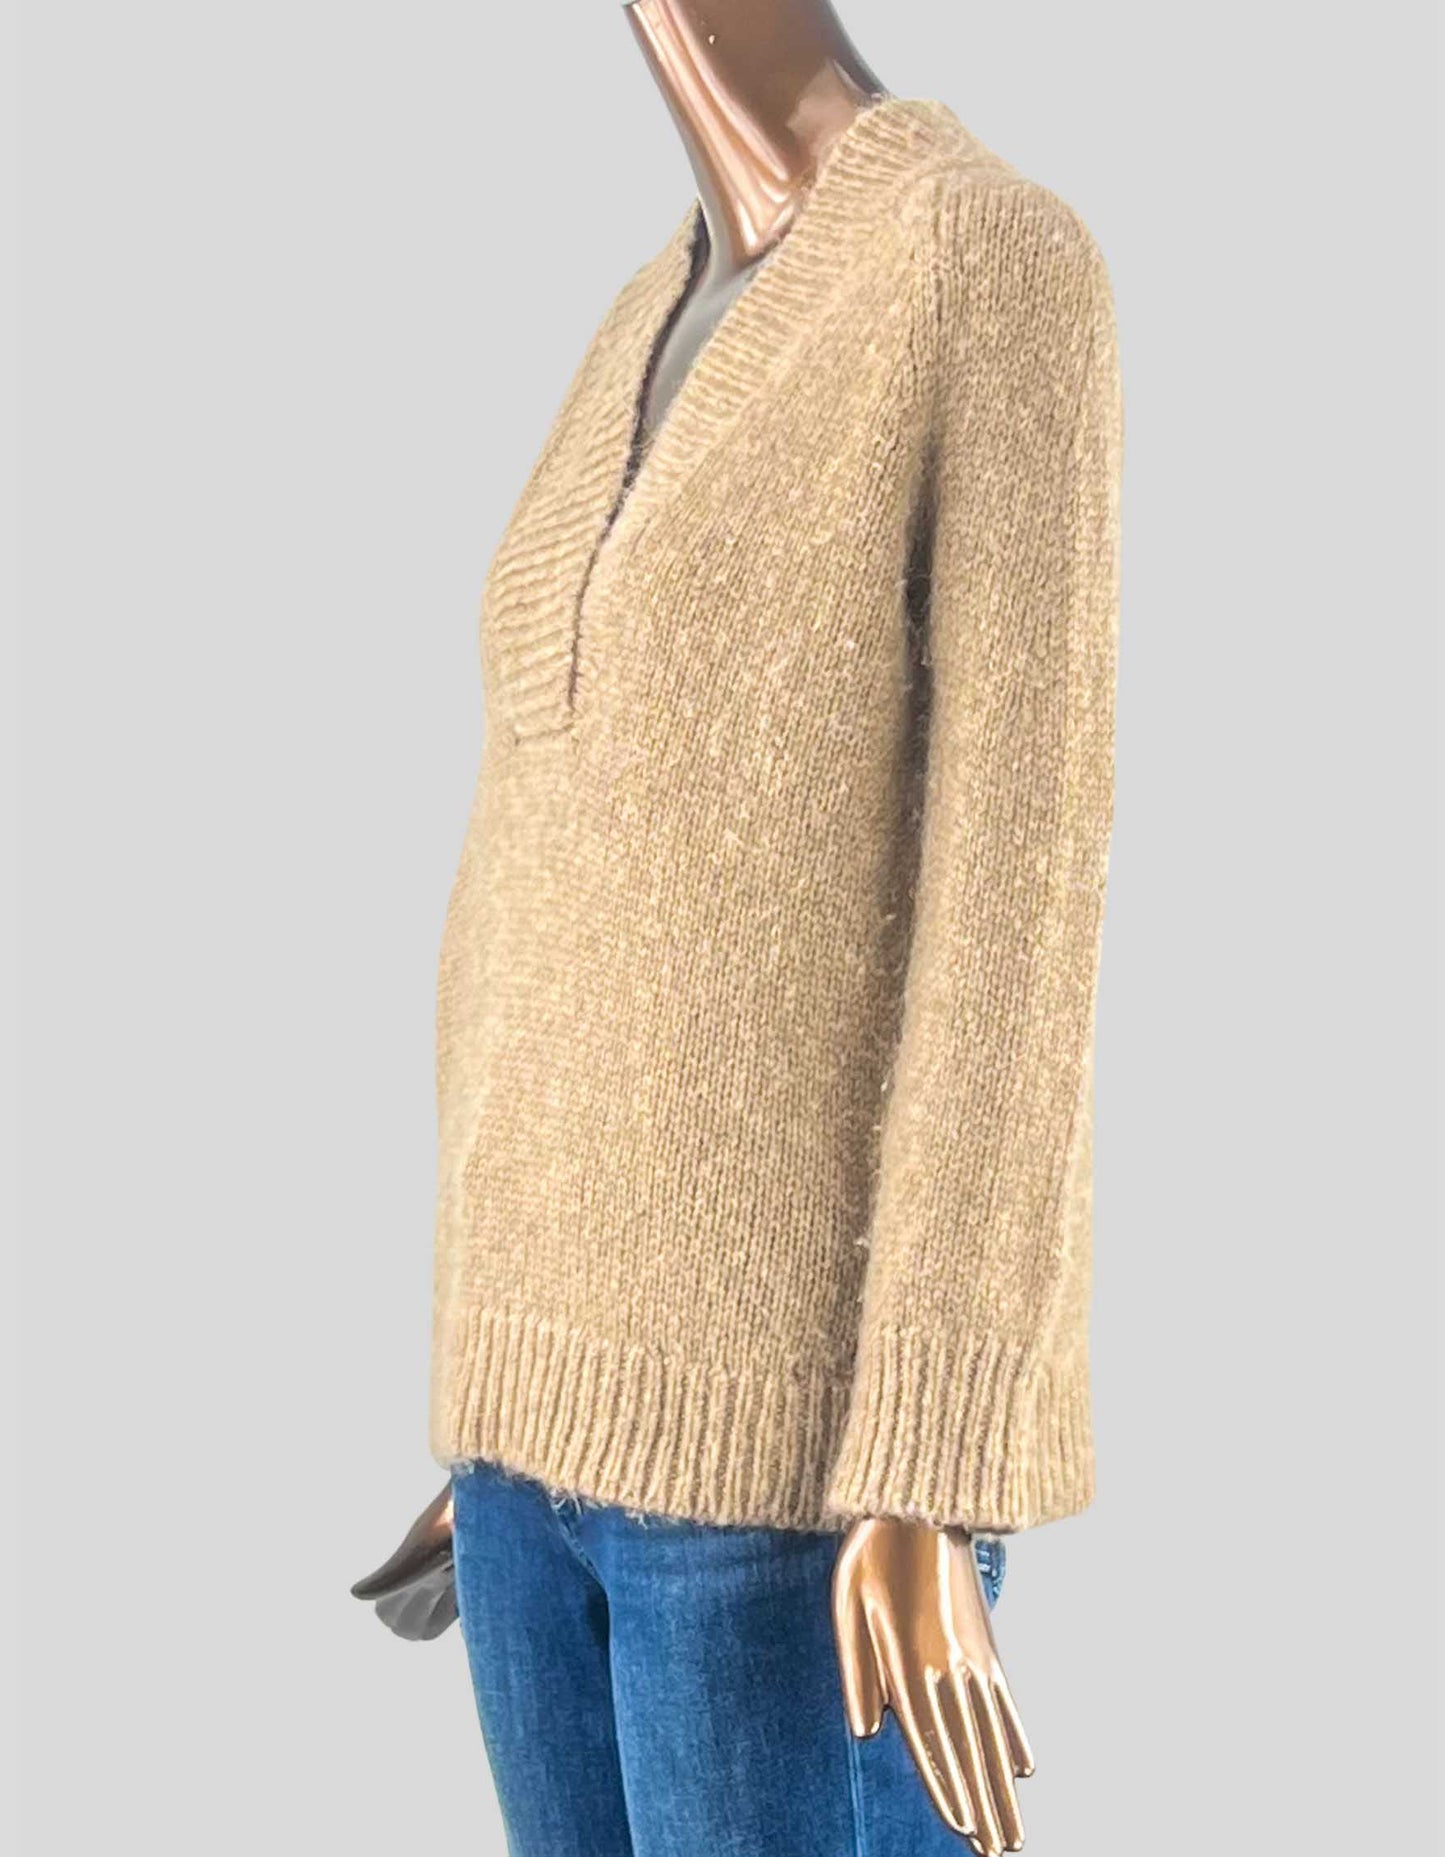 VINCE V-Neck Sweater - Small/Petite